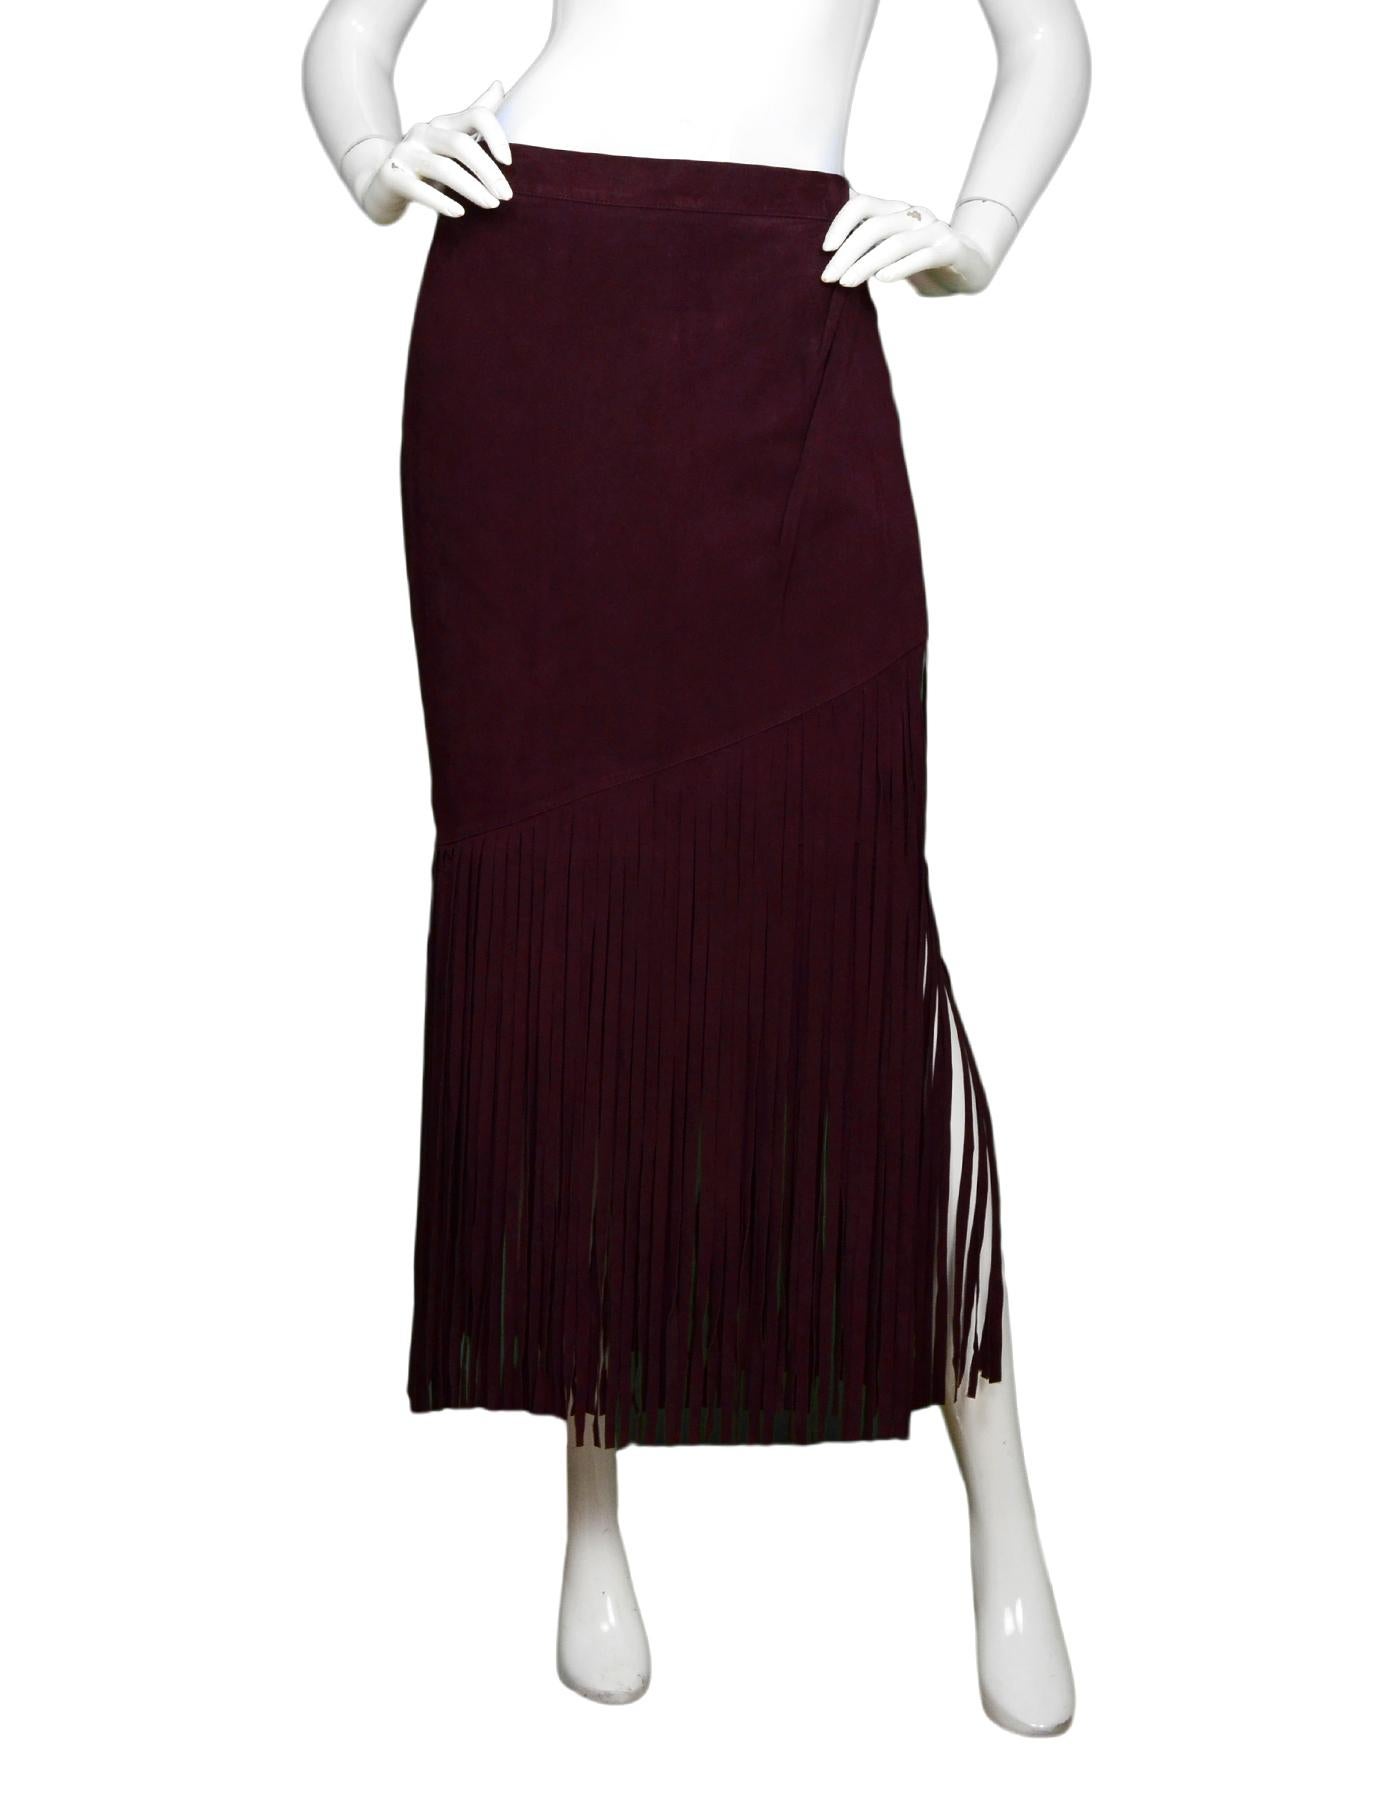 Tamara Mellon Burgundy Suede Fringe Skirt NWT Sz 12

Made In: India  
Color: Burgundy 
Materials: 100% real goat suede
Lining:  100% polyester 
Closure/Opening: Hidden back zipper with two hooks and one button at top
Overall Condition: Excellent